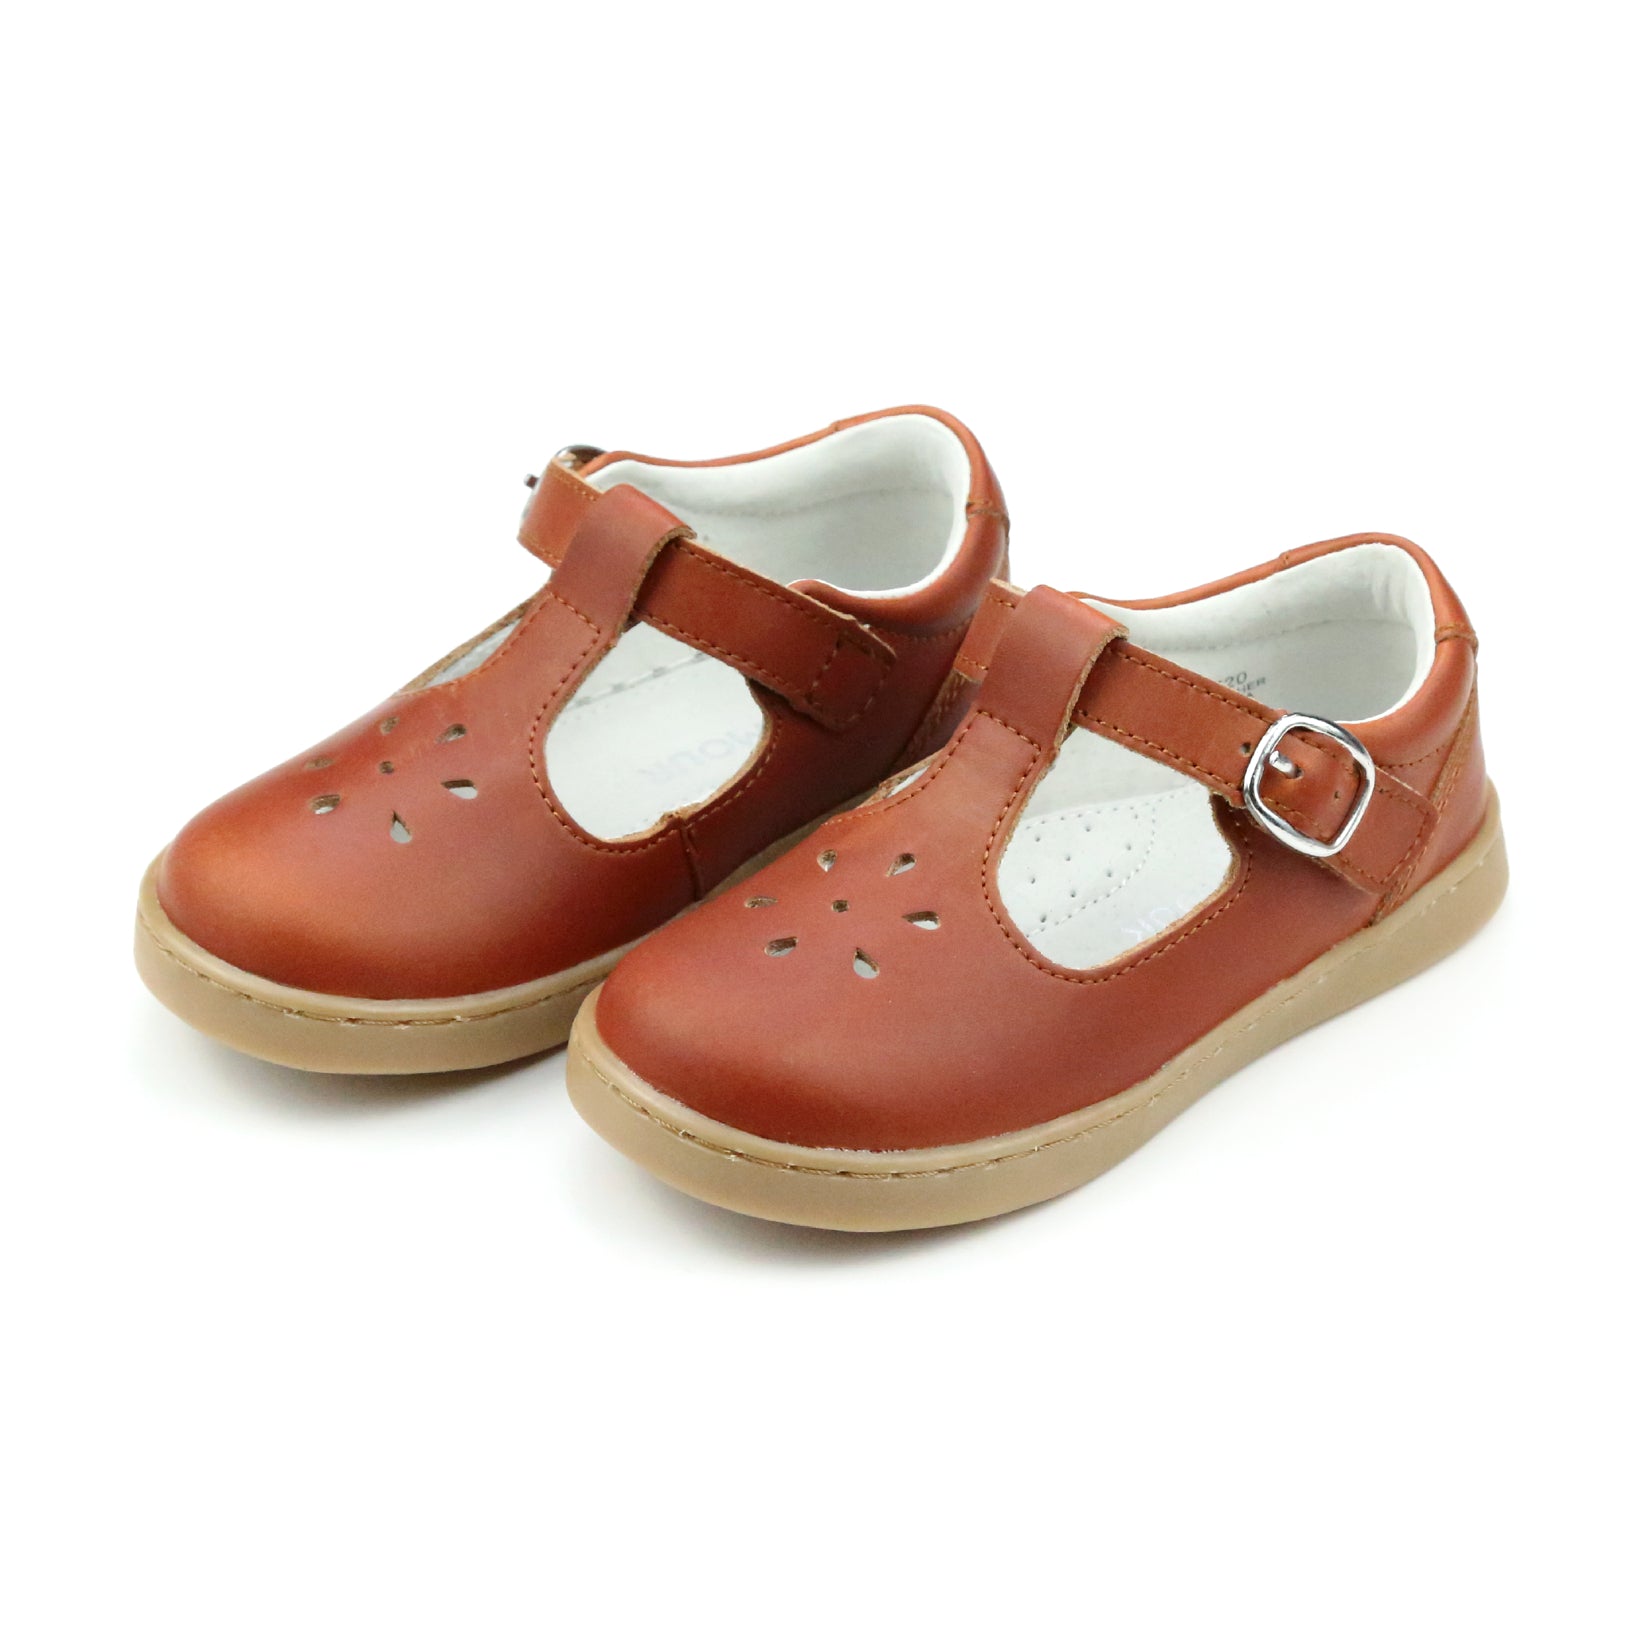 L'Amour Chelsea T-Strap Mary Jane Mary Janes